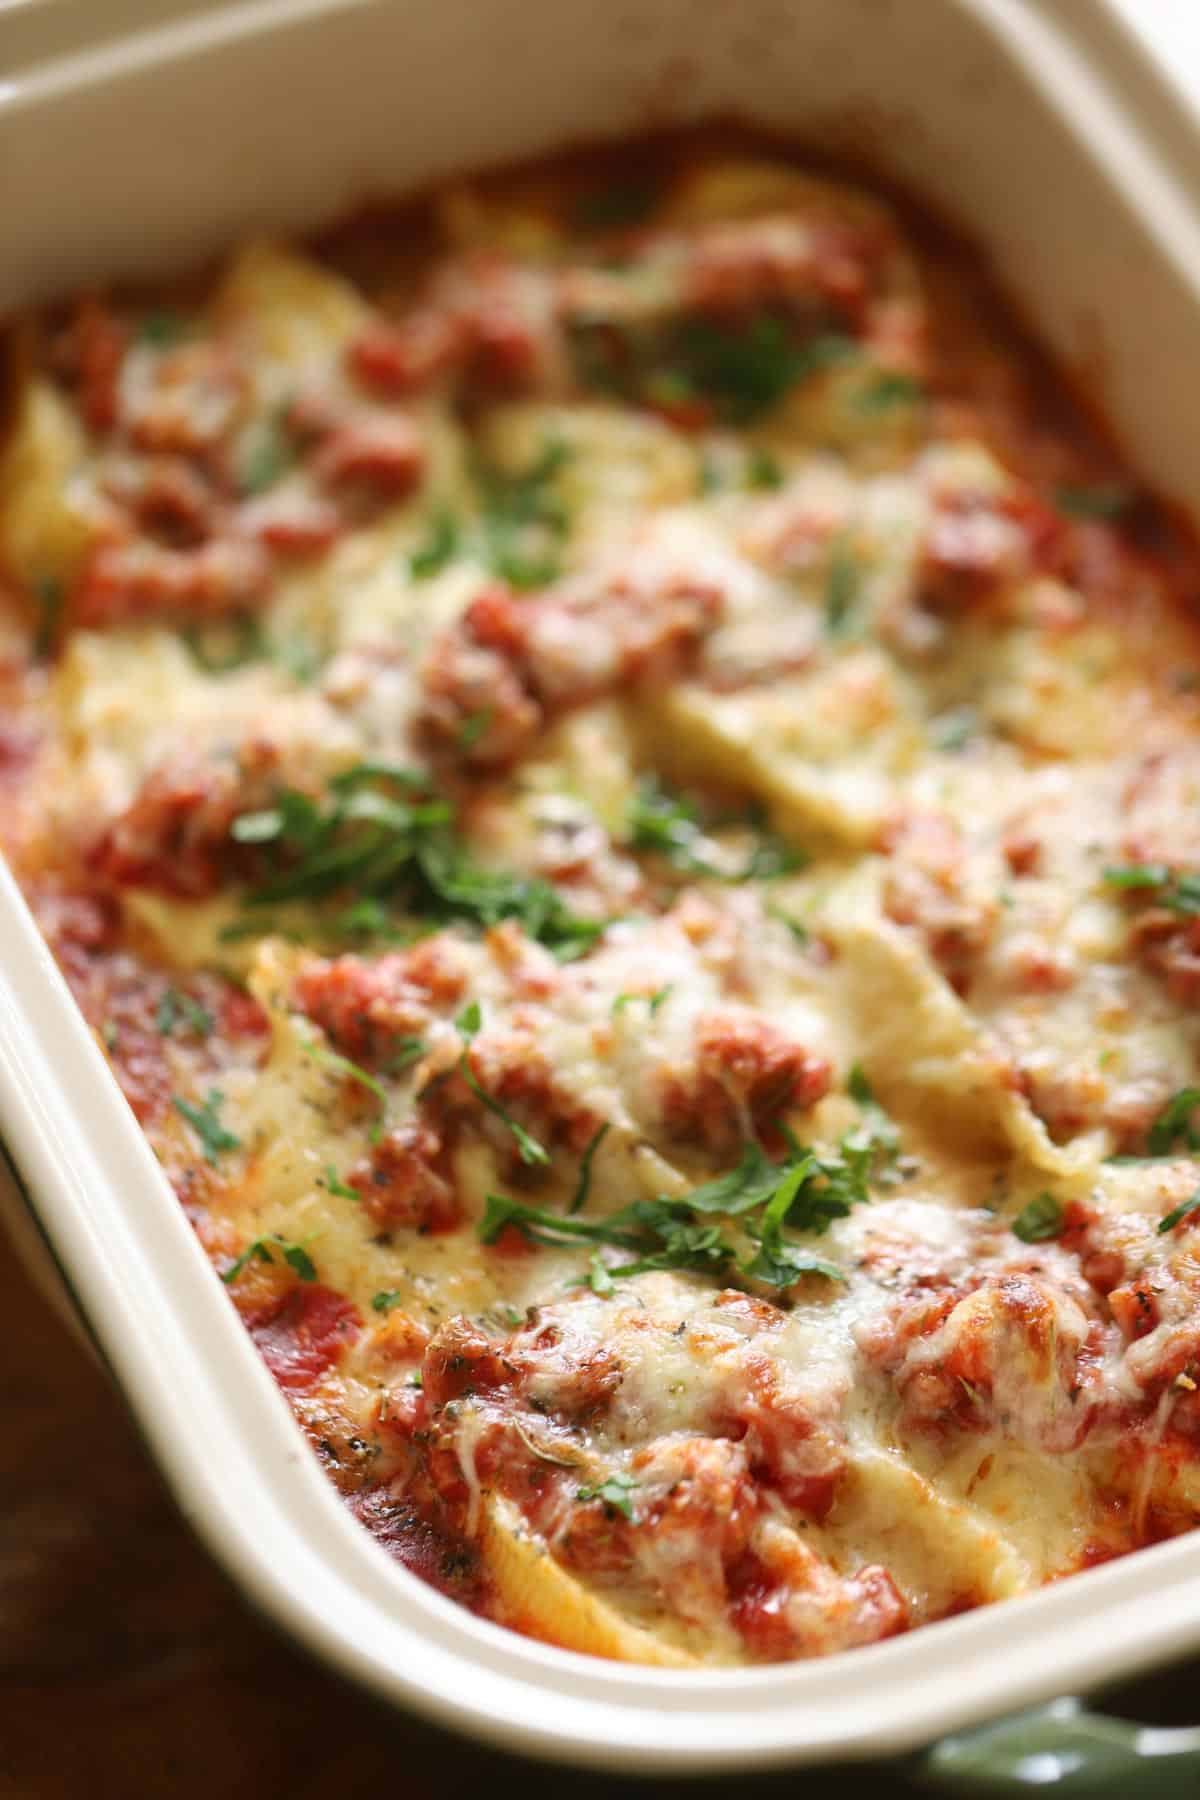 A casserole of cheese, tomato sauce and shells stuffed with ricotta cheese